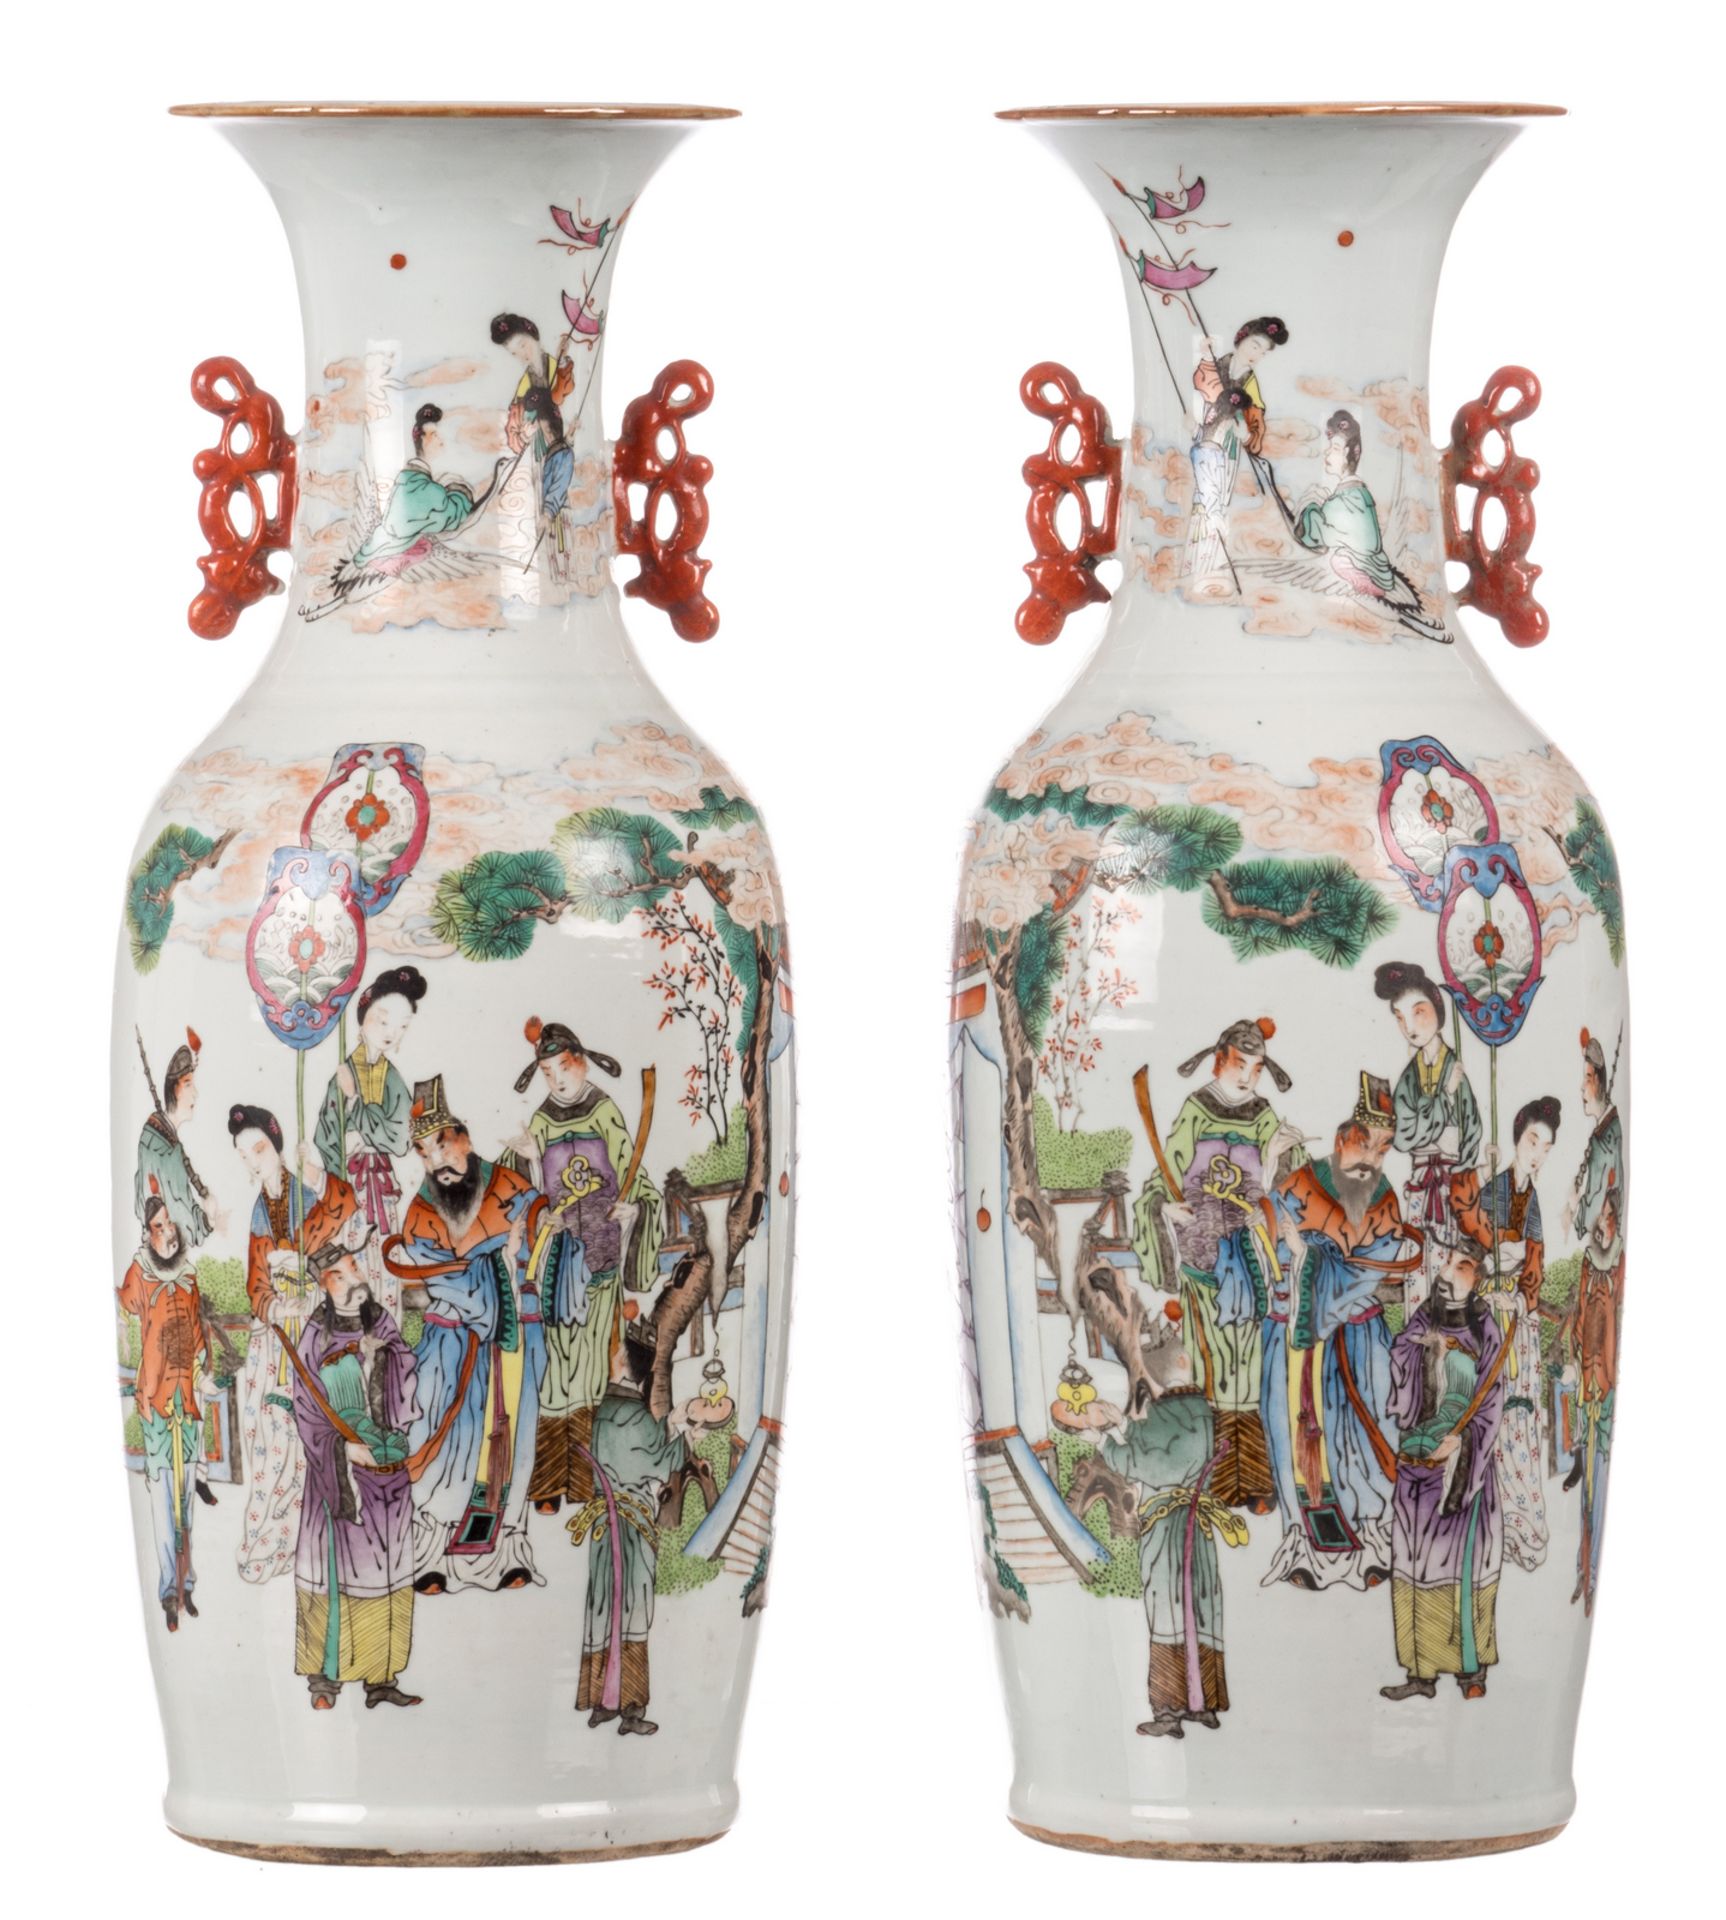 A pair of Chinese polychrome vases, decorated with an animated scene, flower branches and